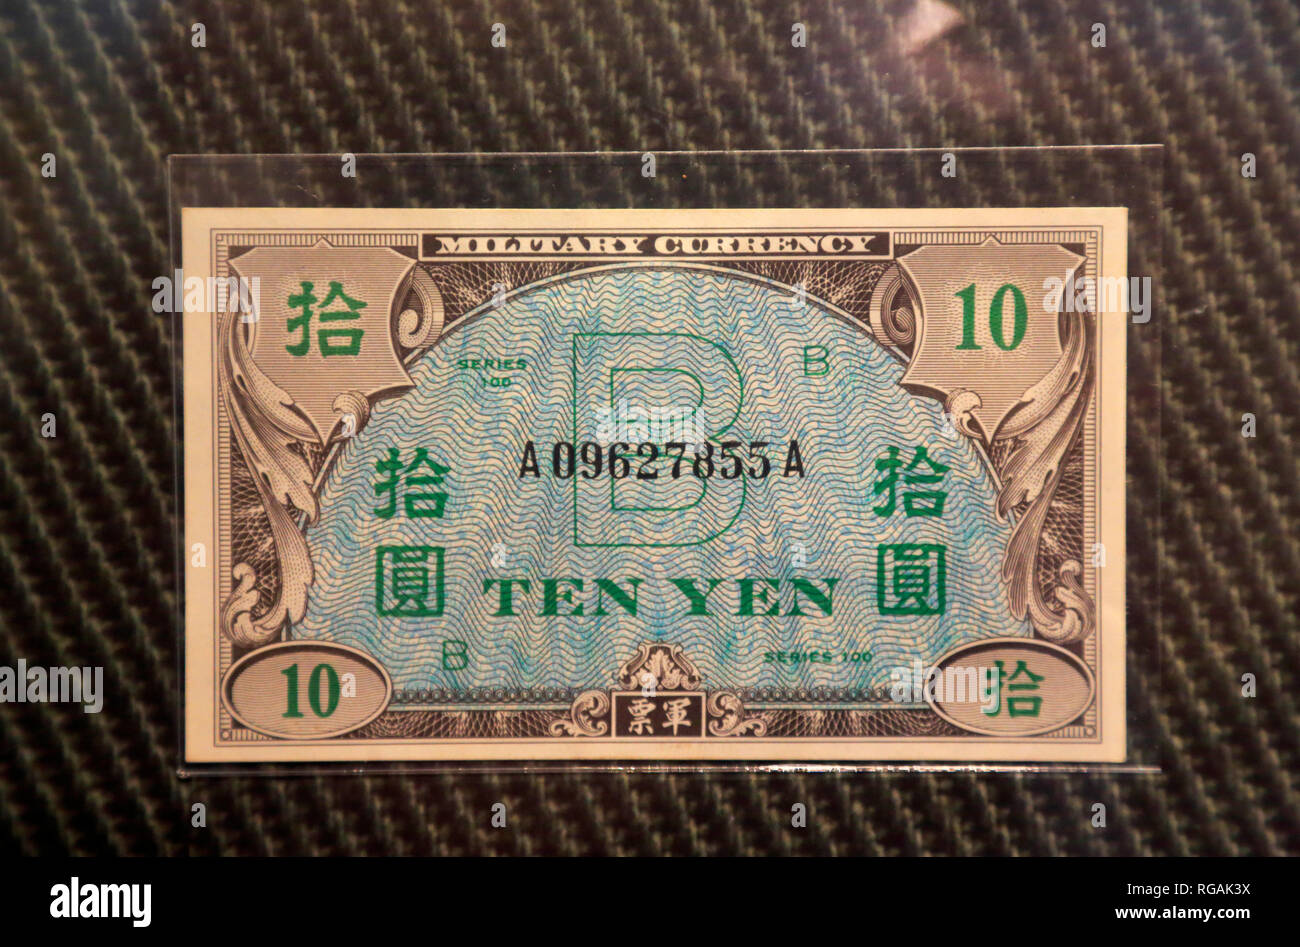 A 10 Yen military currency issued by Empire of Japan during World War II display at Money Museum in Federal Reserve Bank of Chicago. Illinois.USA Stock Photo